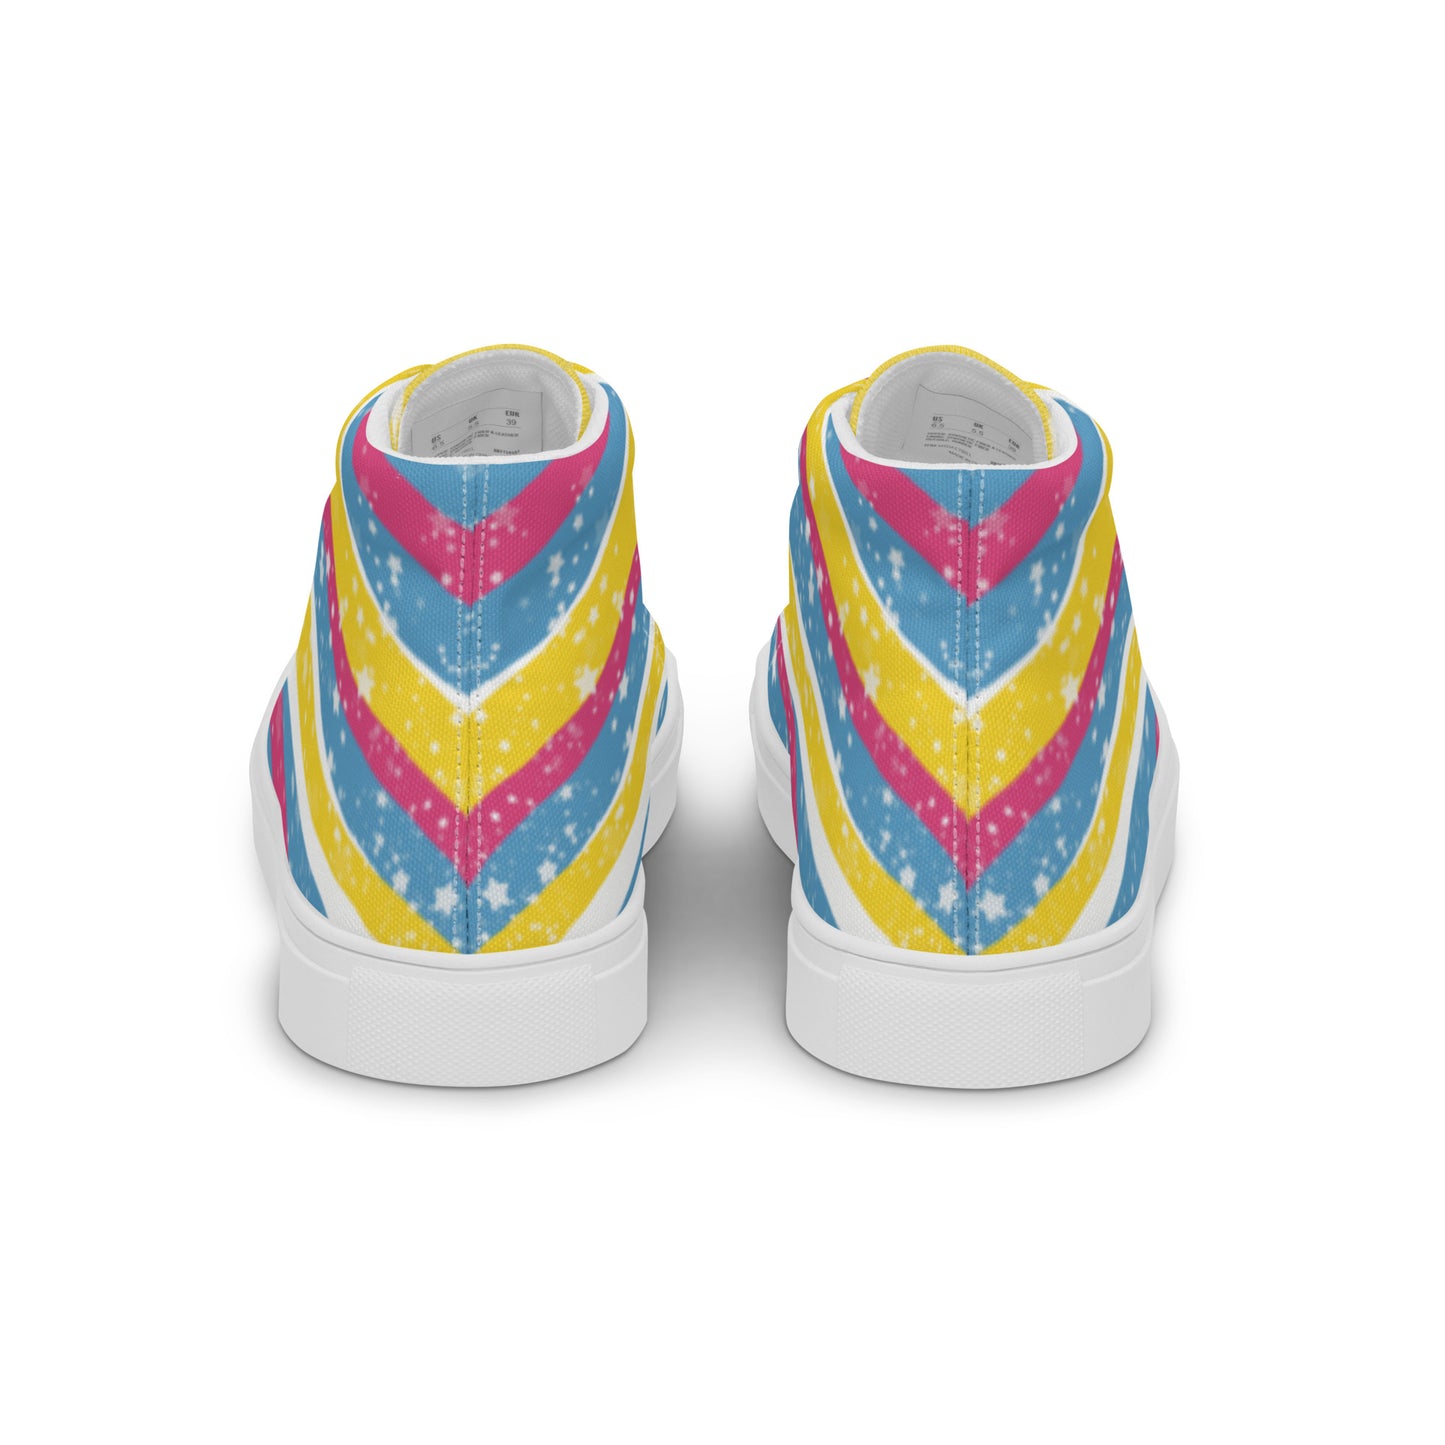 Back view: a pair of high top shoes with pink, yellow, and blue ribbons that get larger from heel to laces, white stars, and the Aras Sivad logo on the tongue.